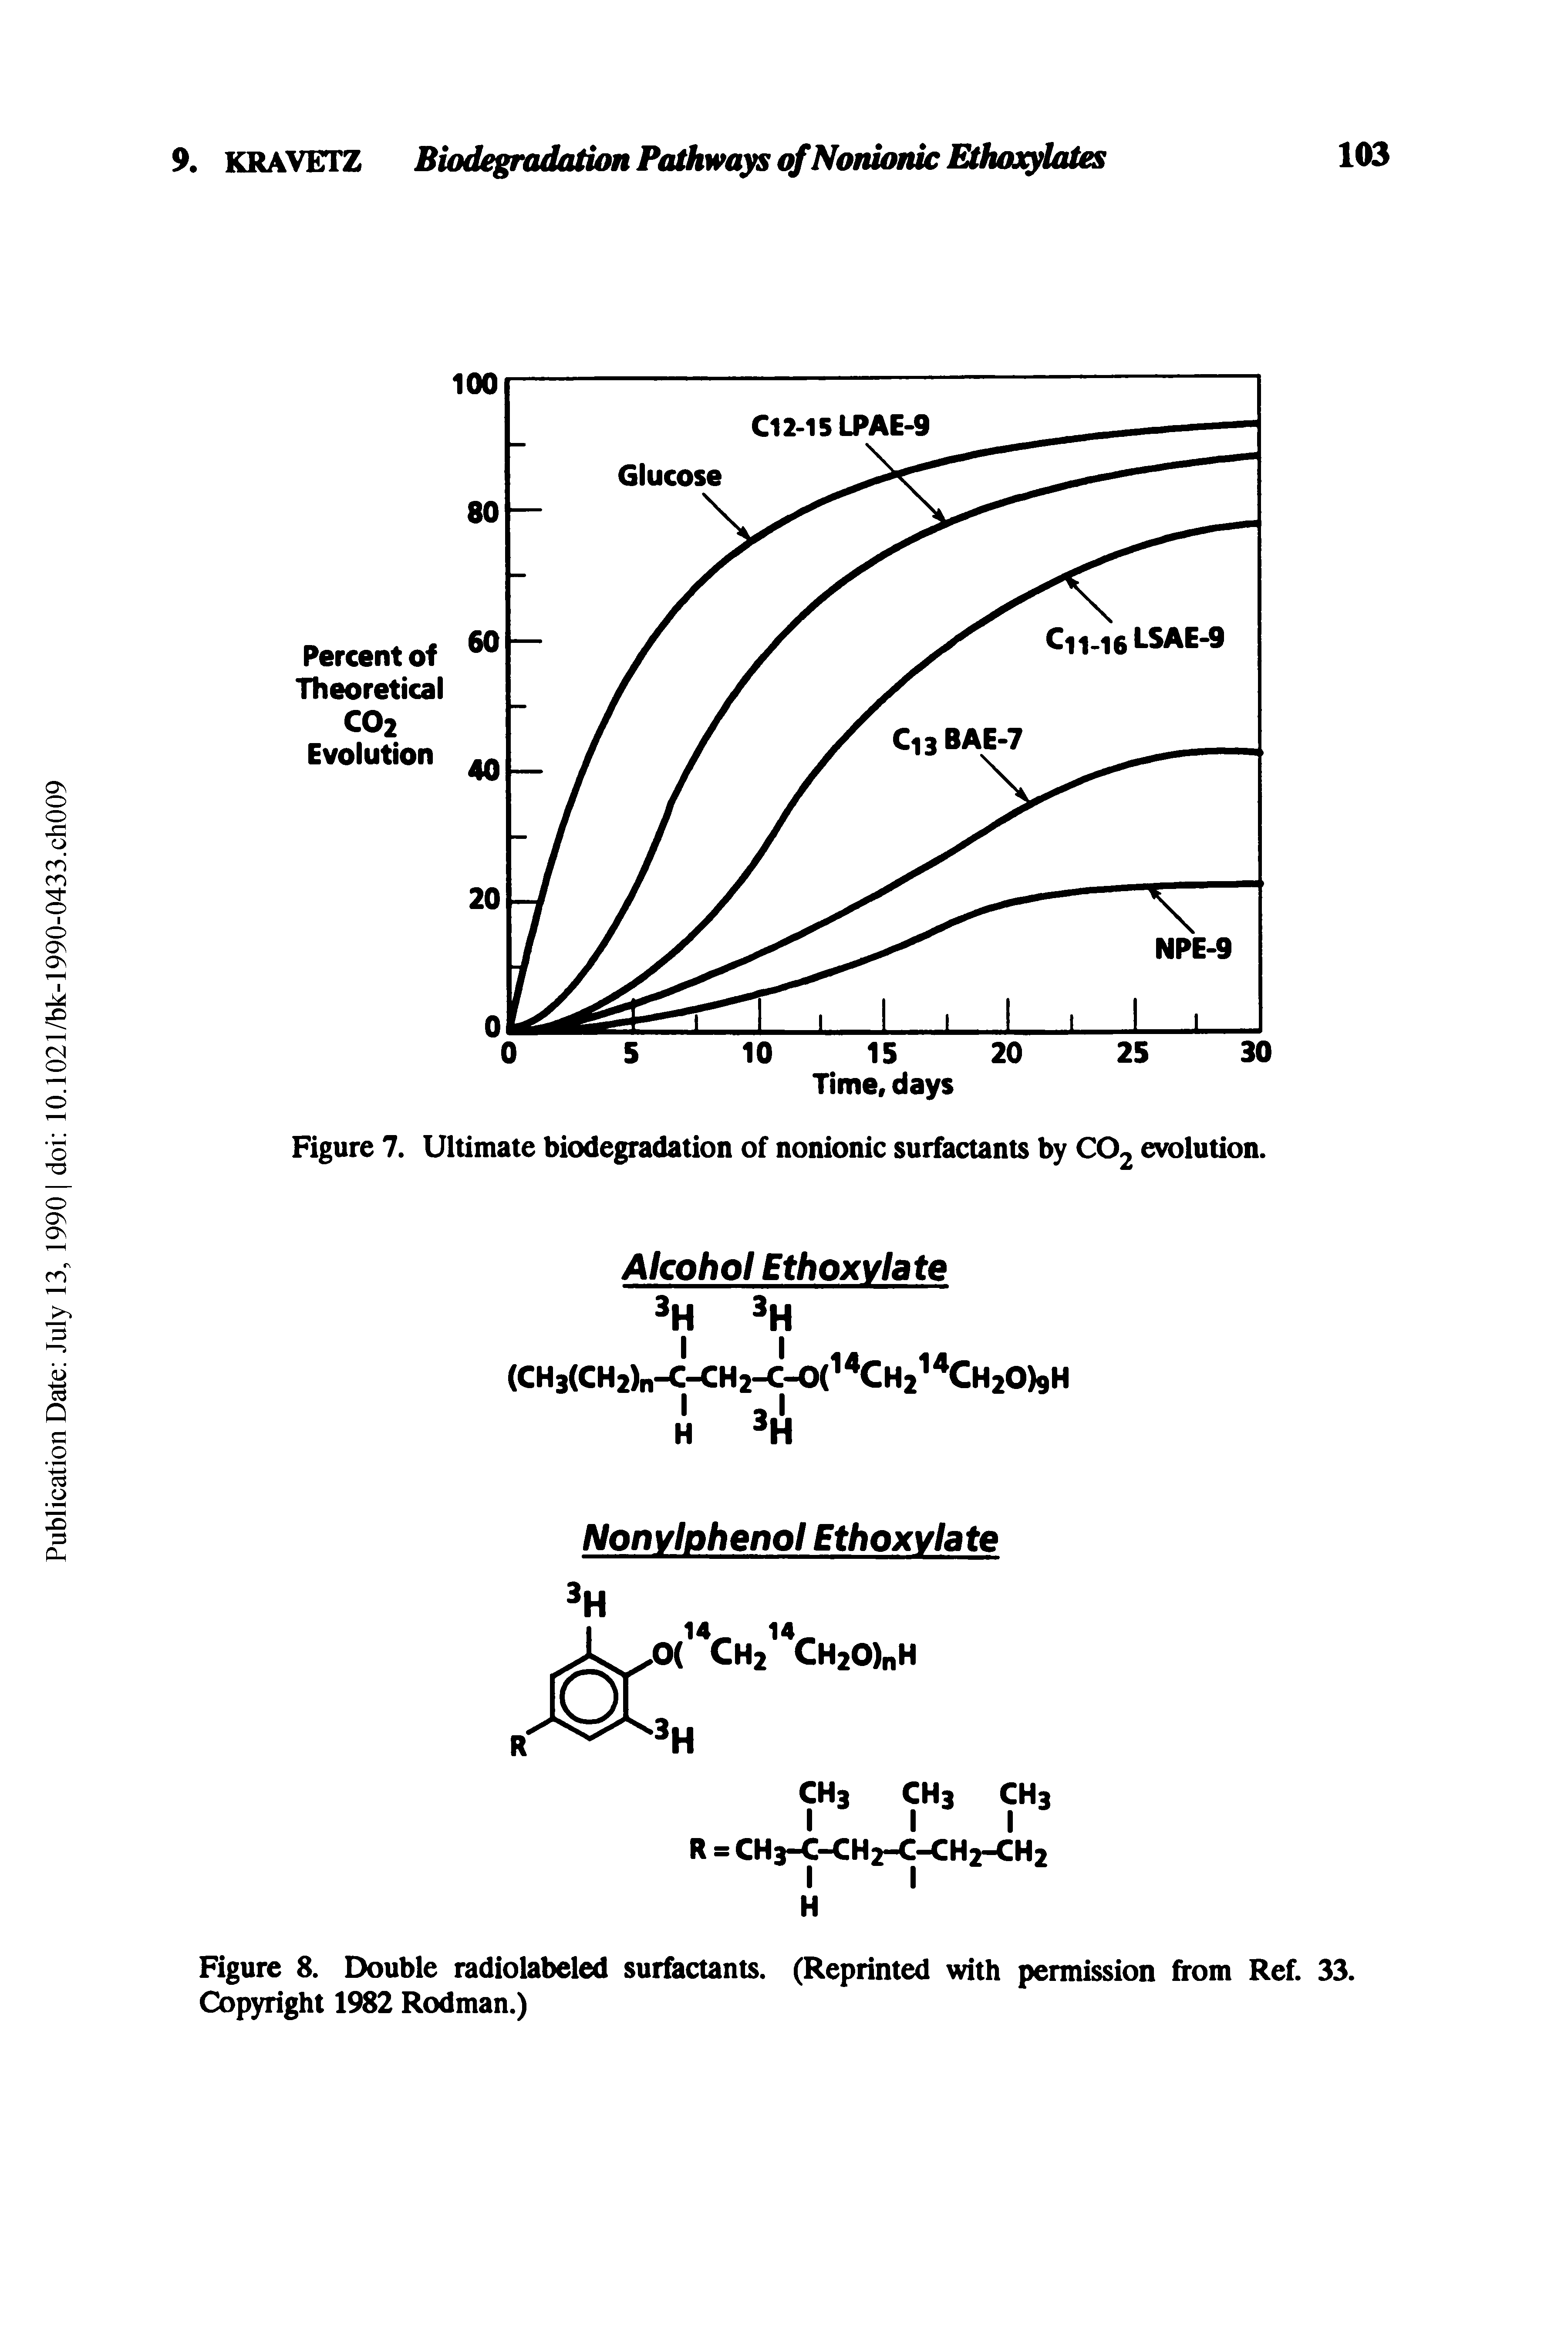 Figure 7. Ultimate biodegradation of nonionic surfactants by CO2 evolution.